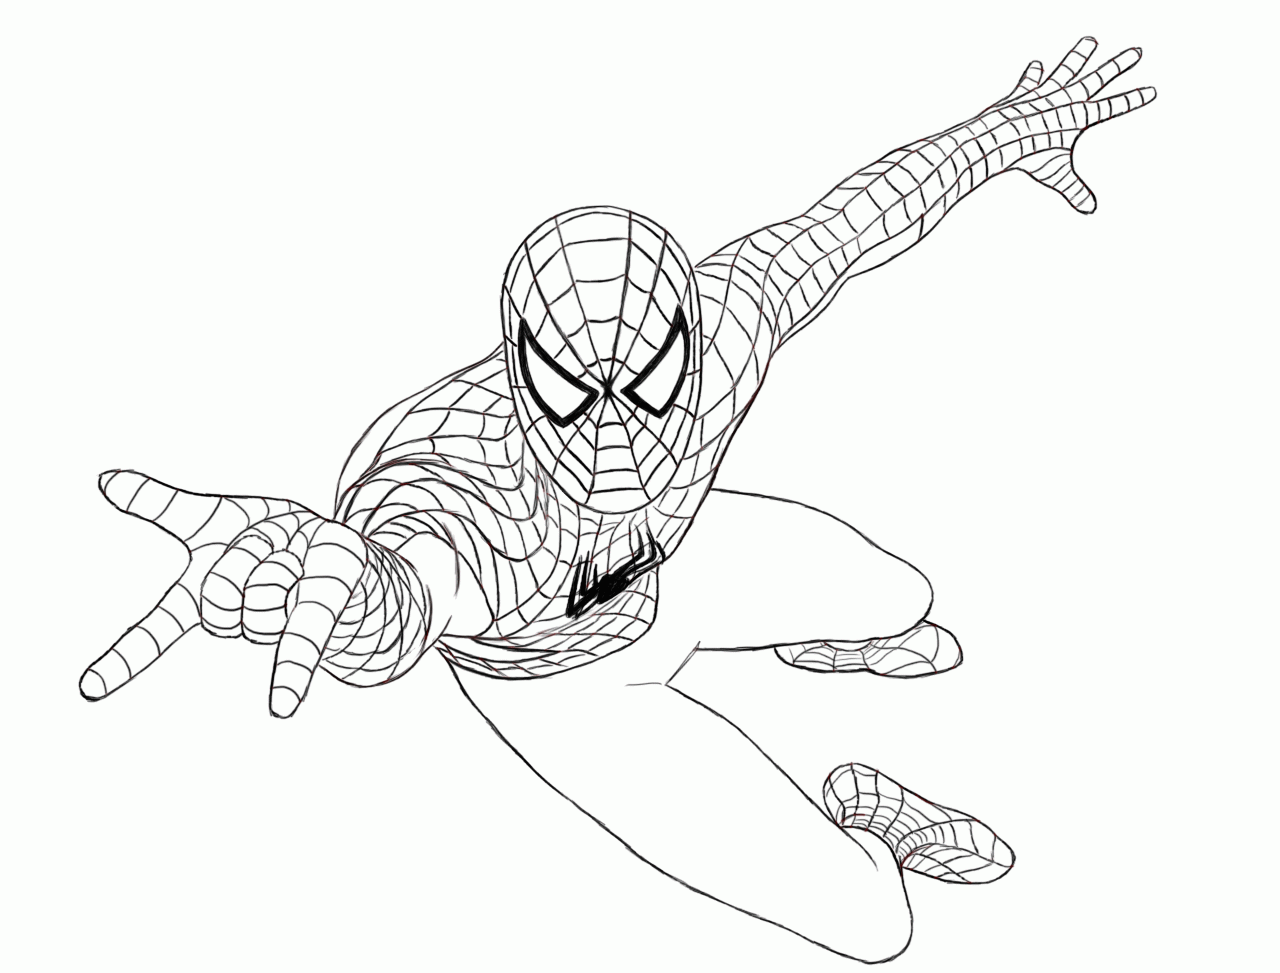 Spiderman Coloring pages | Coloring page | FREE Coloring pages for ...